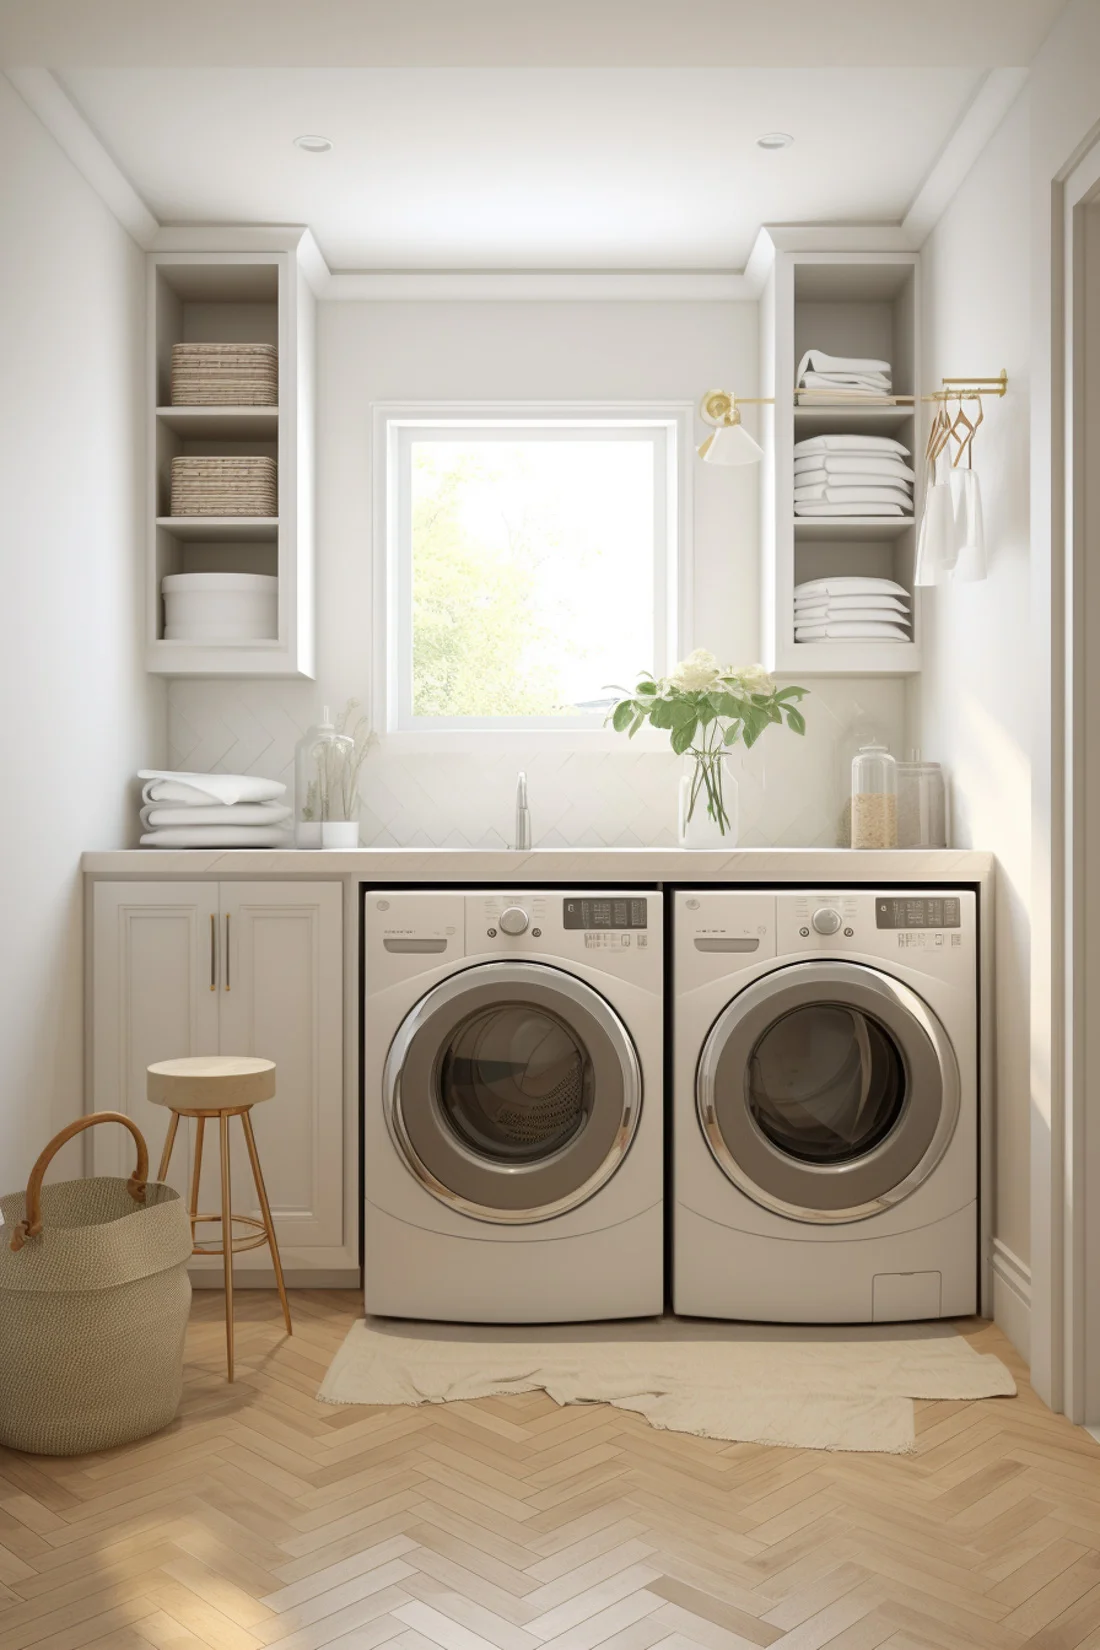 Laundry Room Shelf Ideas: The Only 5 Types You (Actually) Need to Know ...